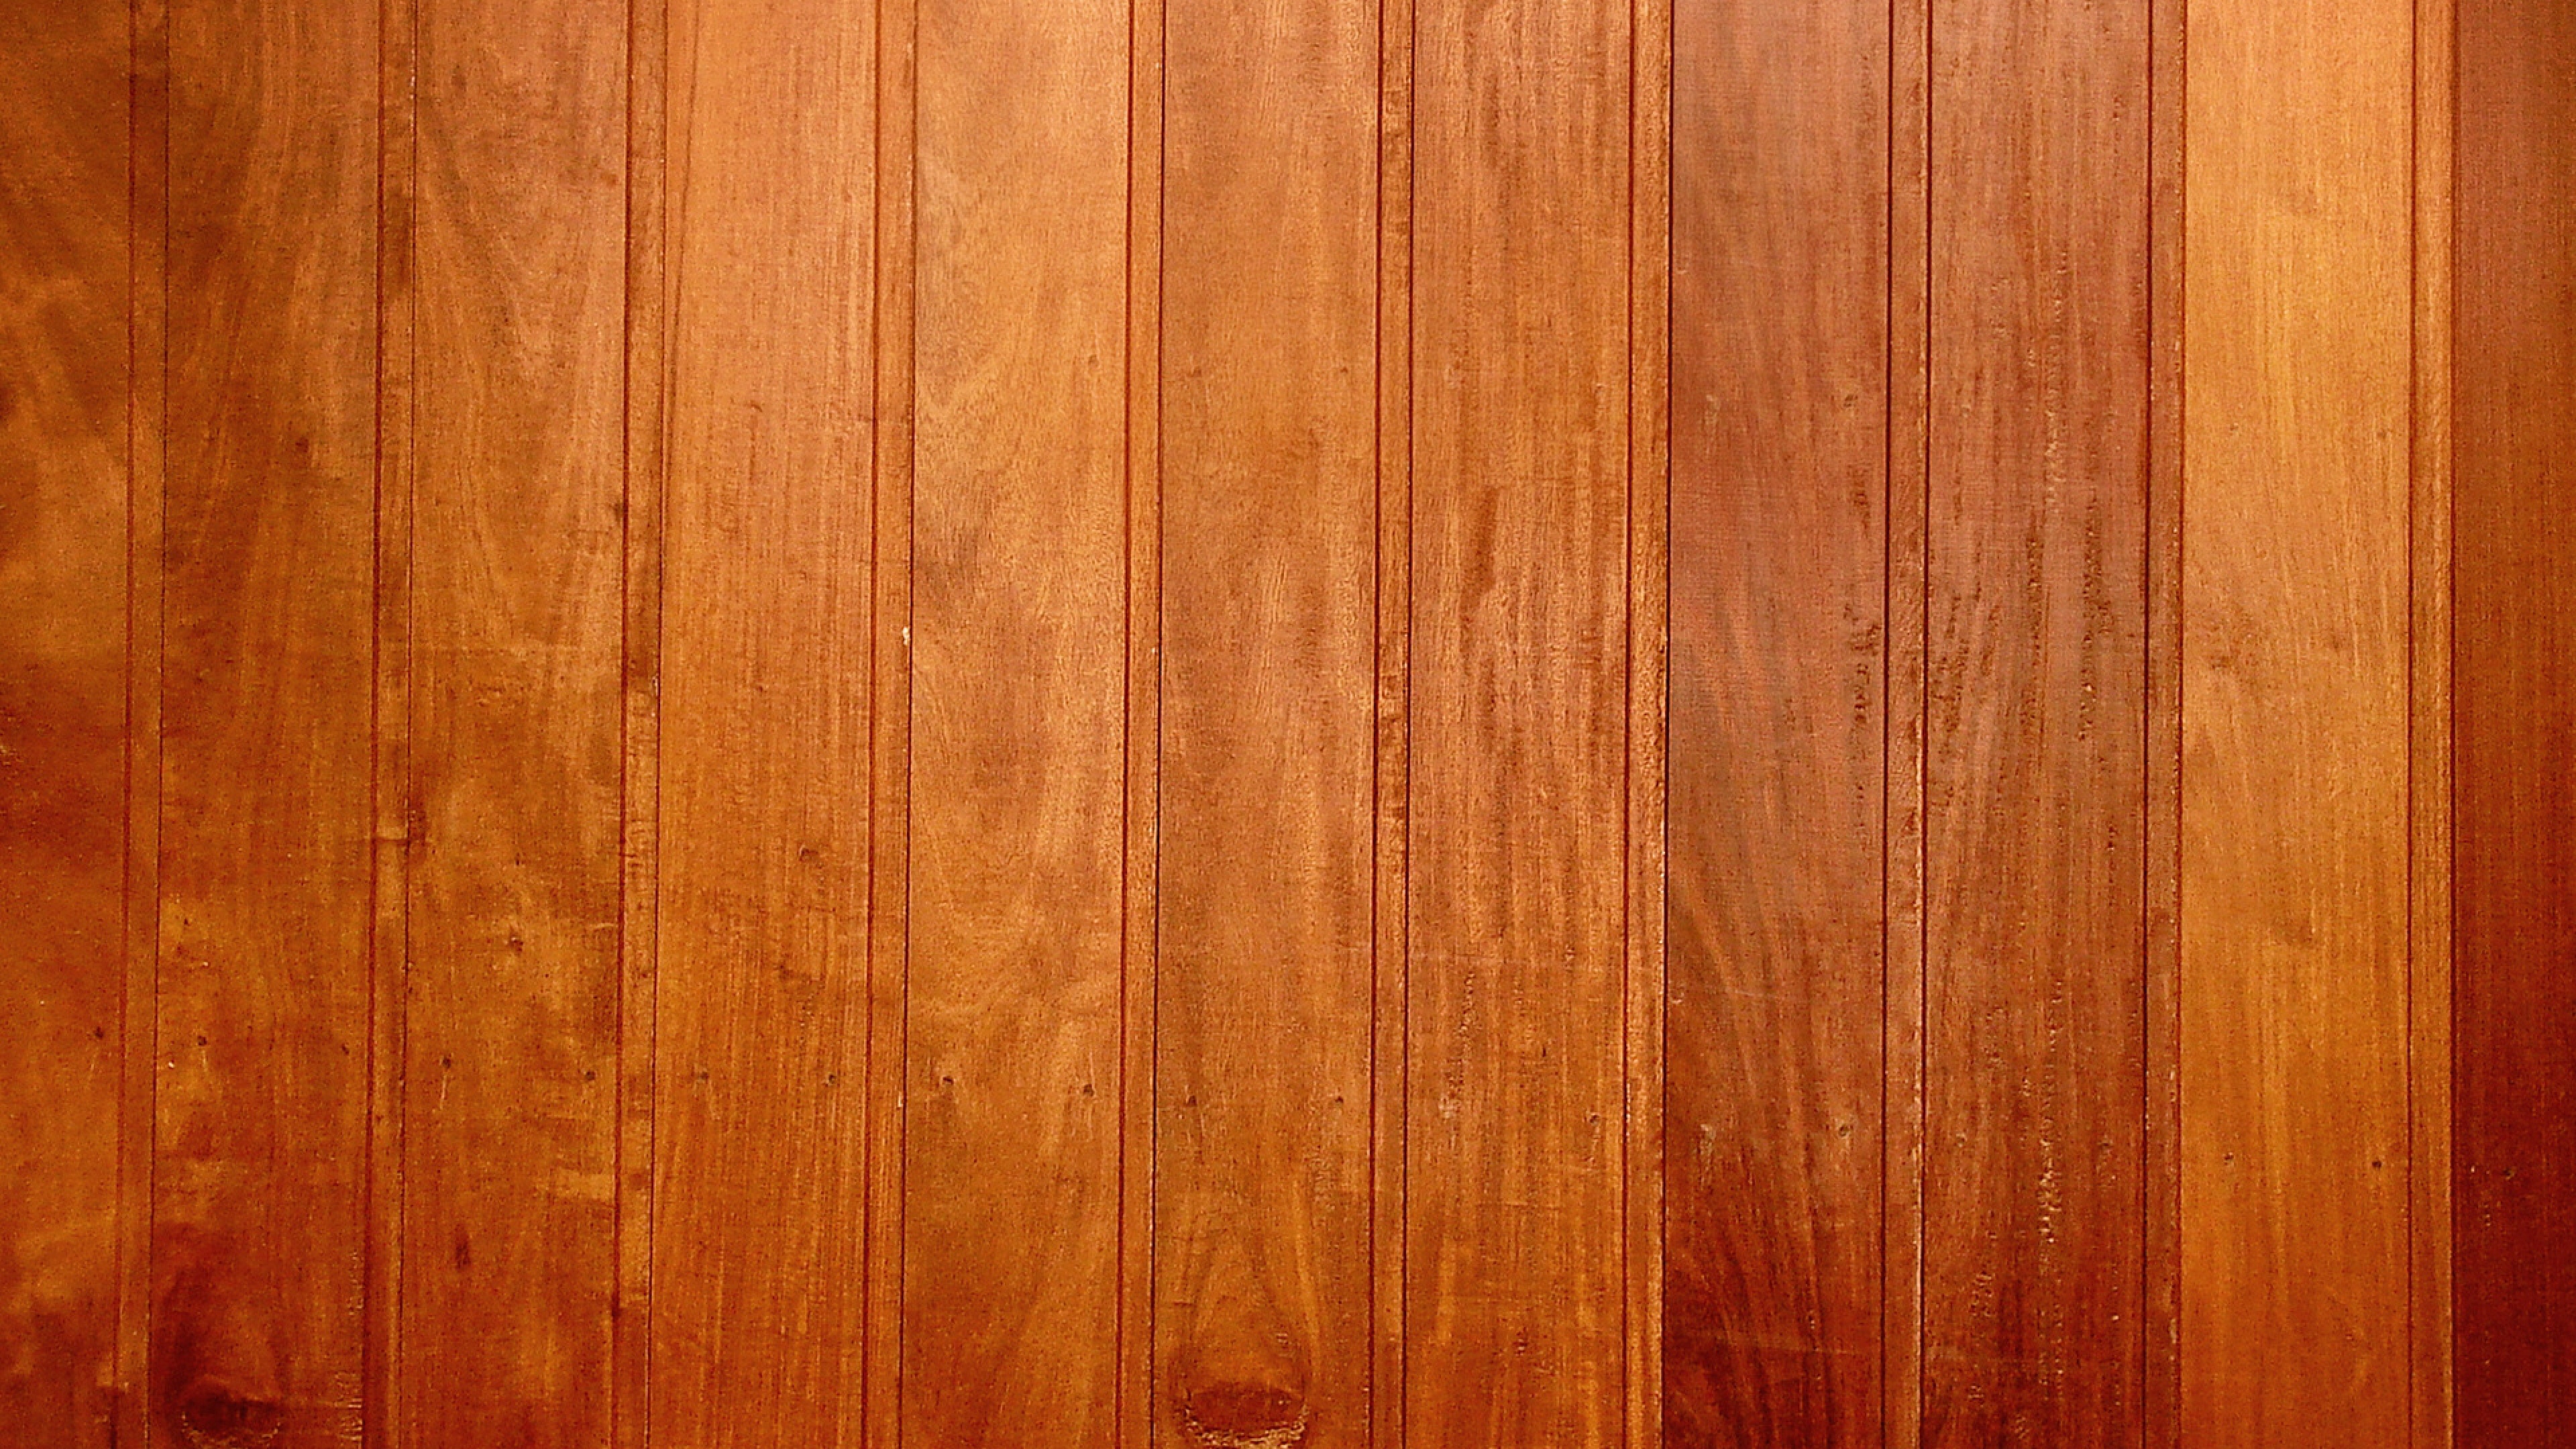 Wood Texture Wallpaper 4k Here Are Only The Best 4k Texture Wallpapers